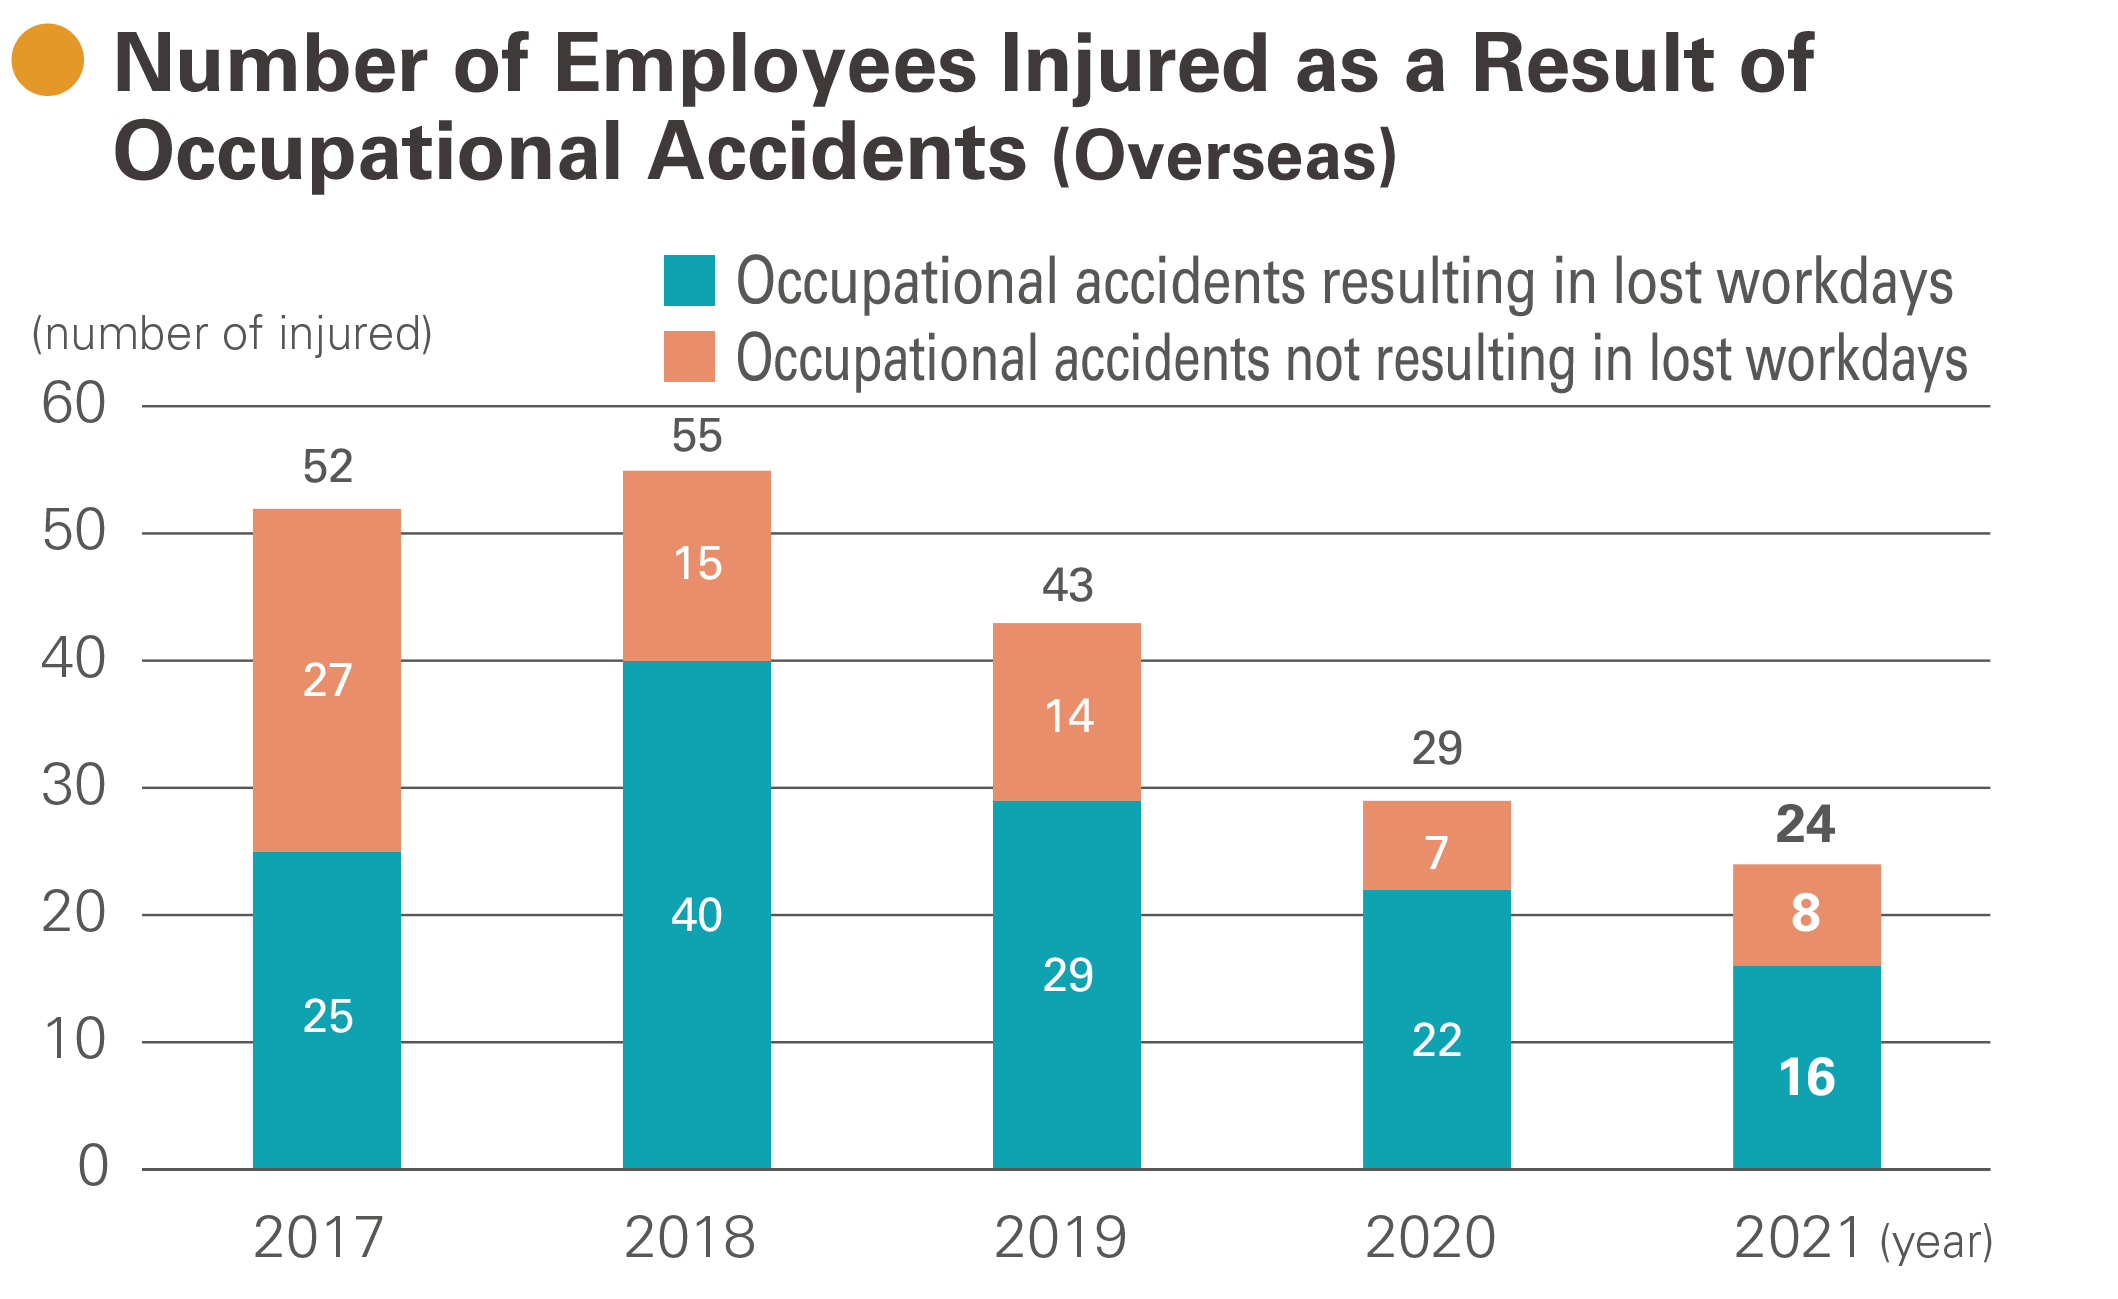 Number of Employees Injured as a Result of Occupational Accidents (Overseas) 